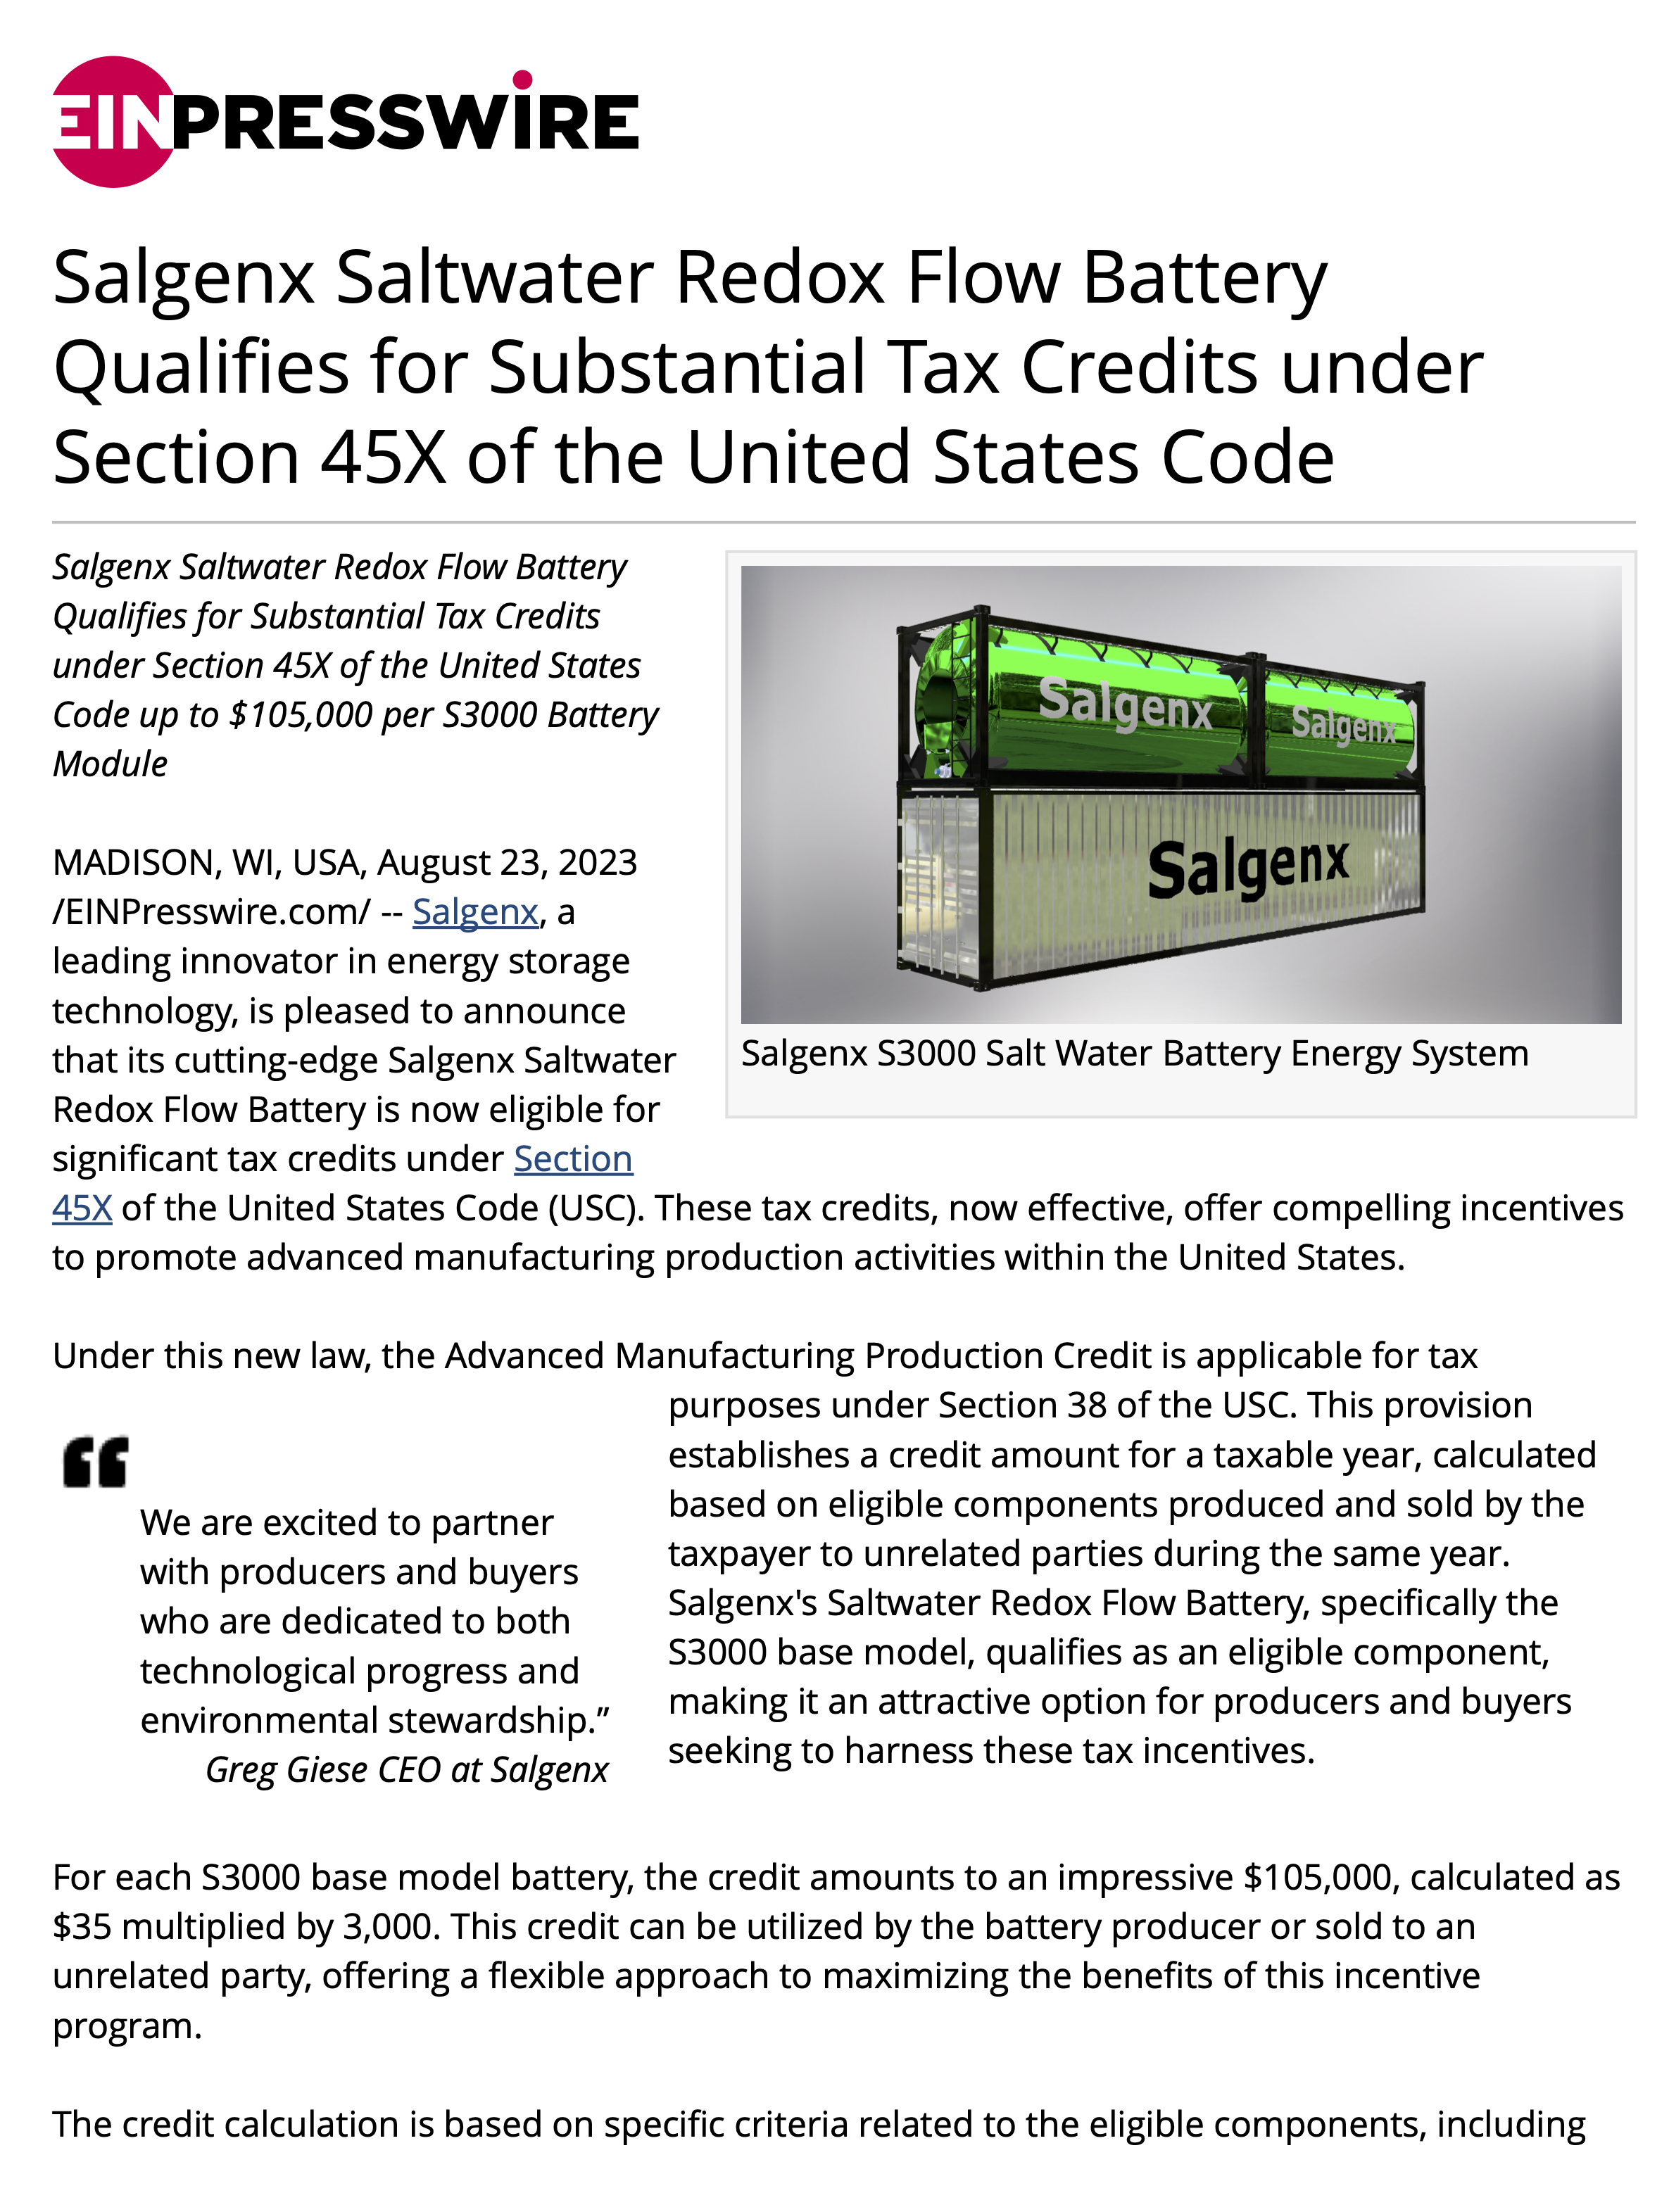 Salgenx Saltwater Redox Flow Battery Qualifies for Substantial Tax Credits under Section 45X of the United States Code up to $105,000 per S3000 Battery